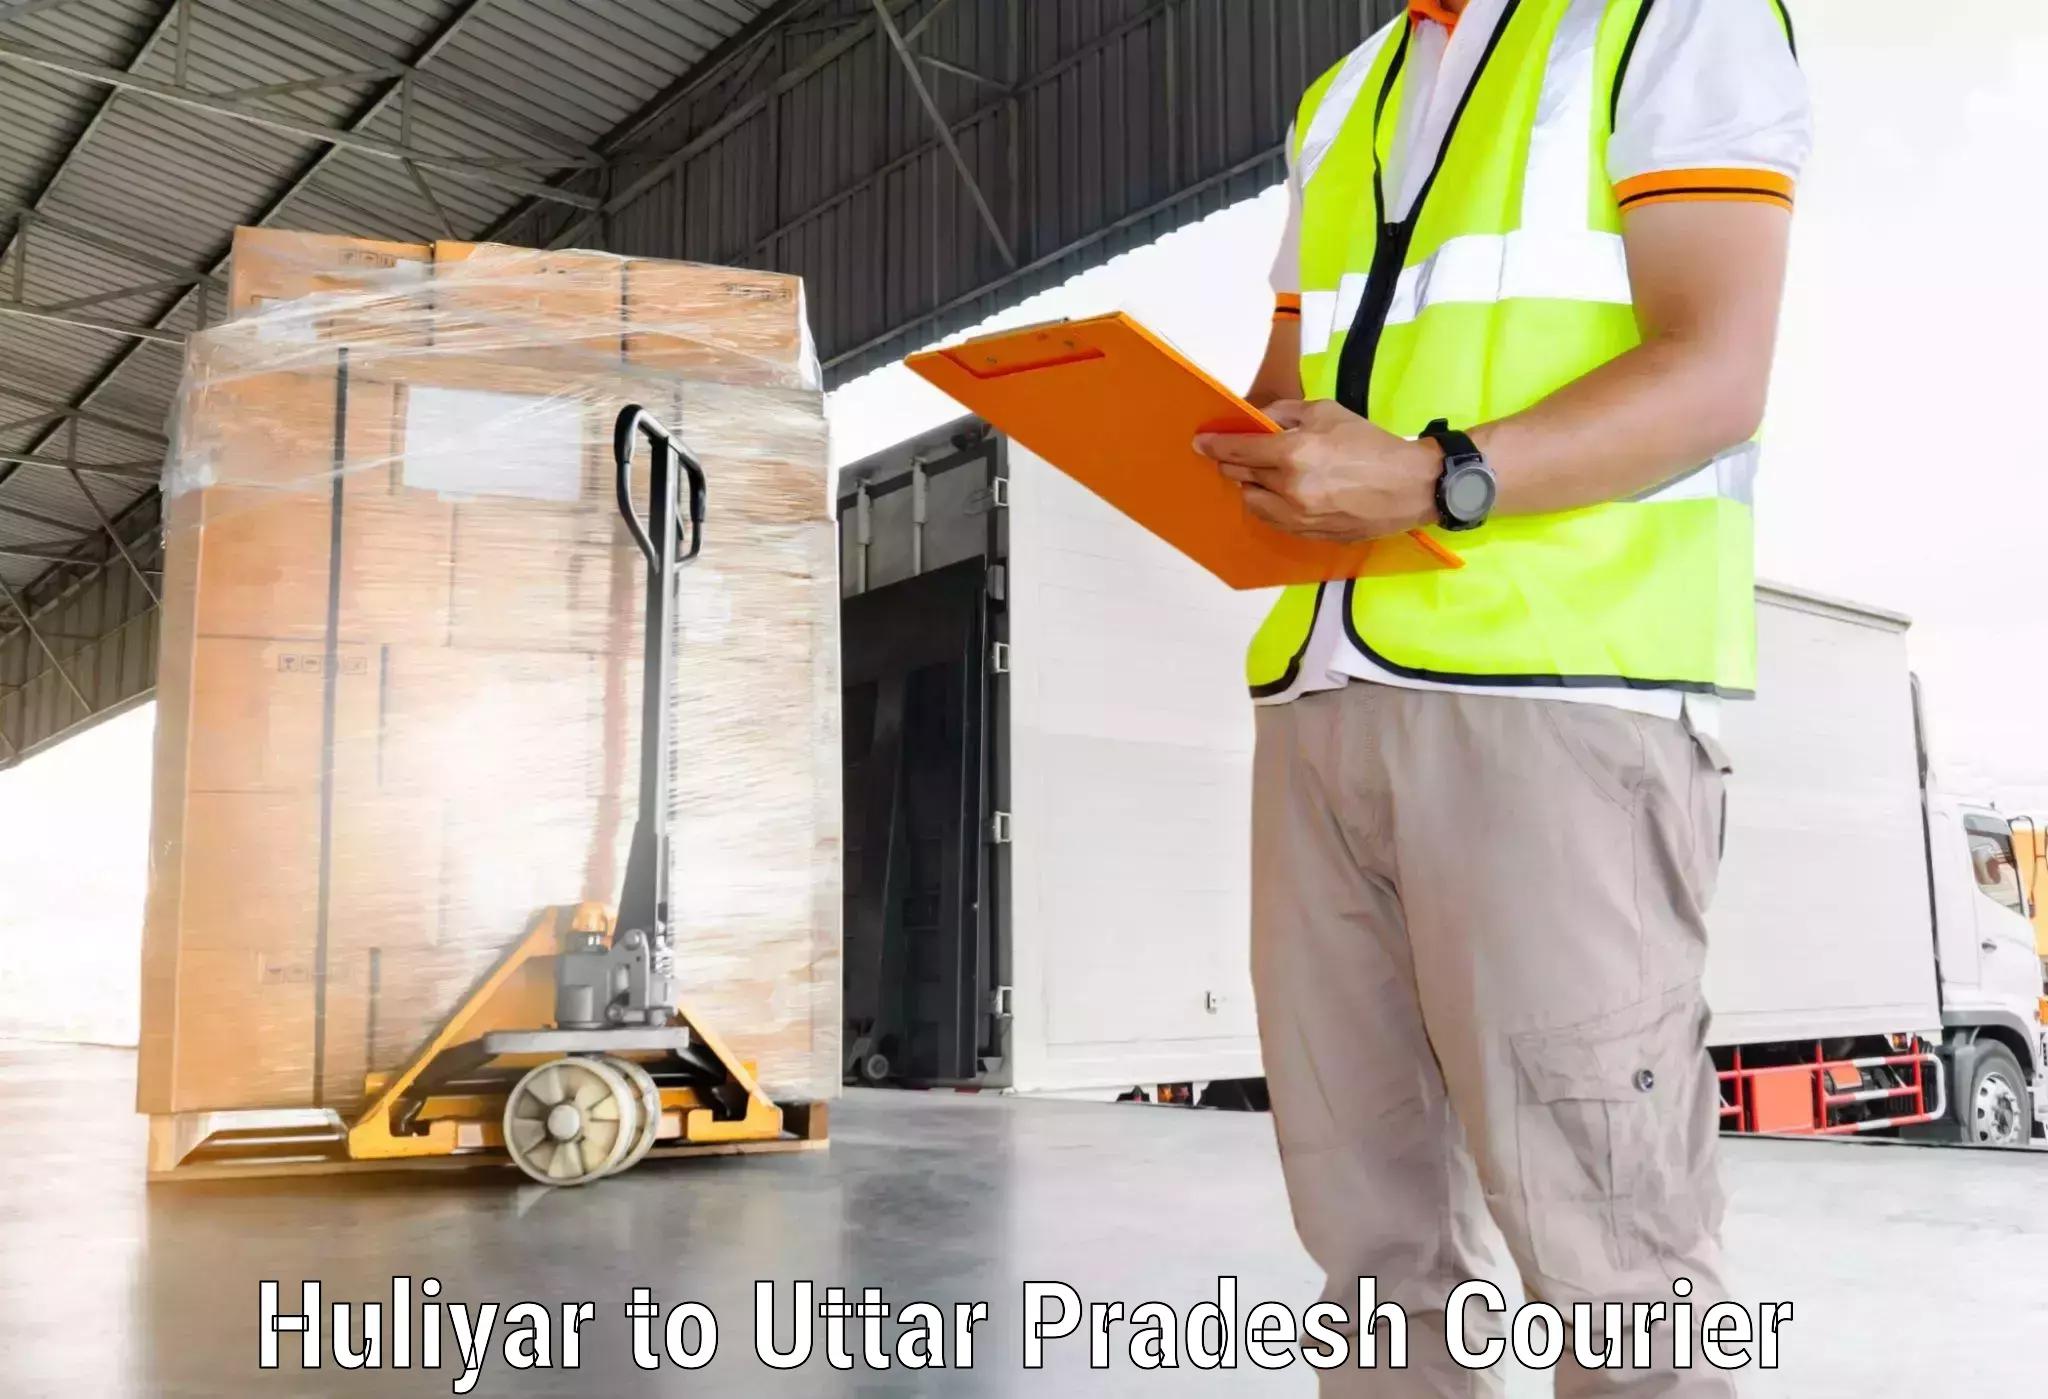 Reliable package handling Huliyar to Fatehabad Agra